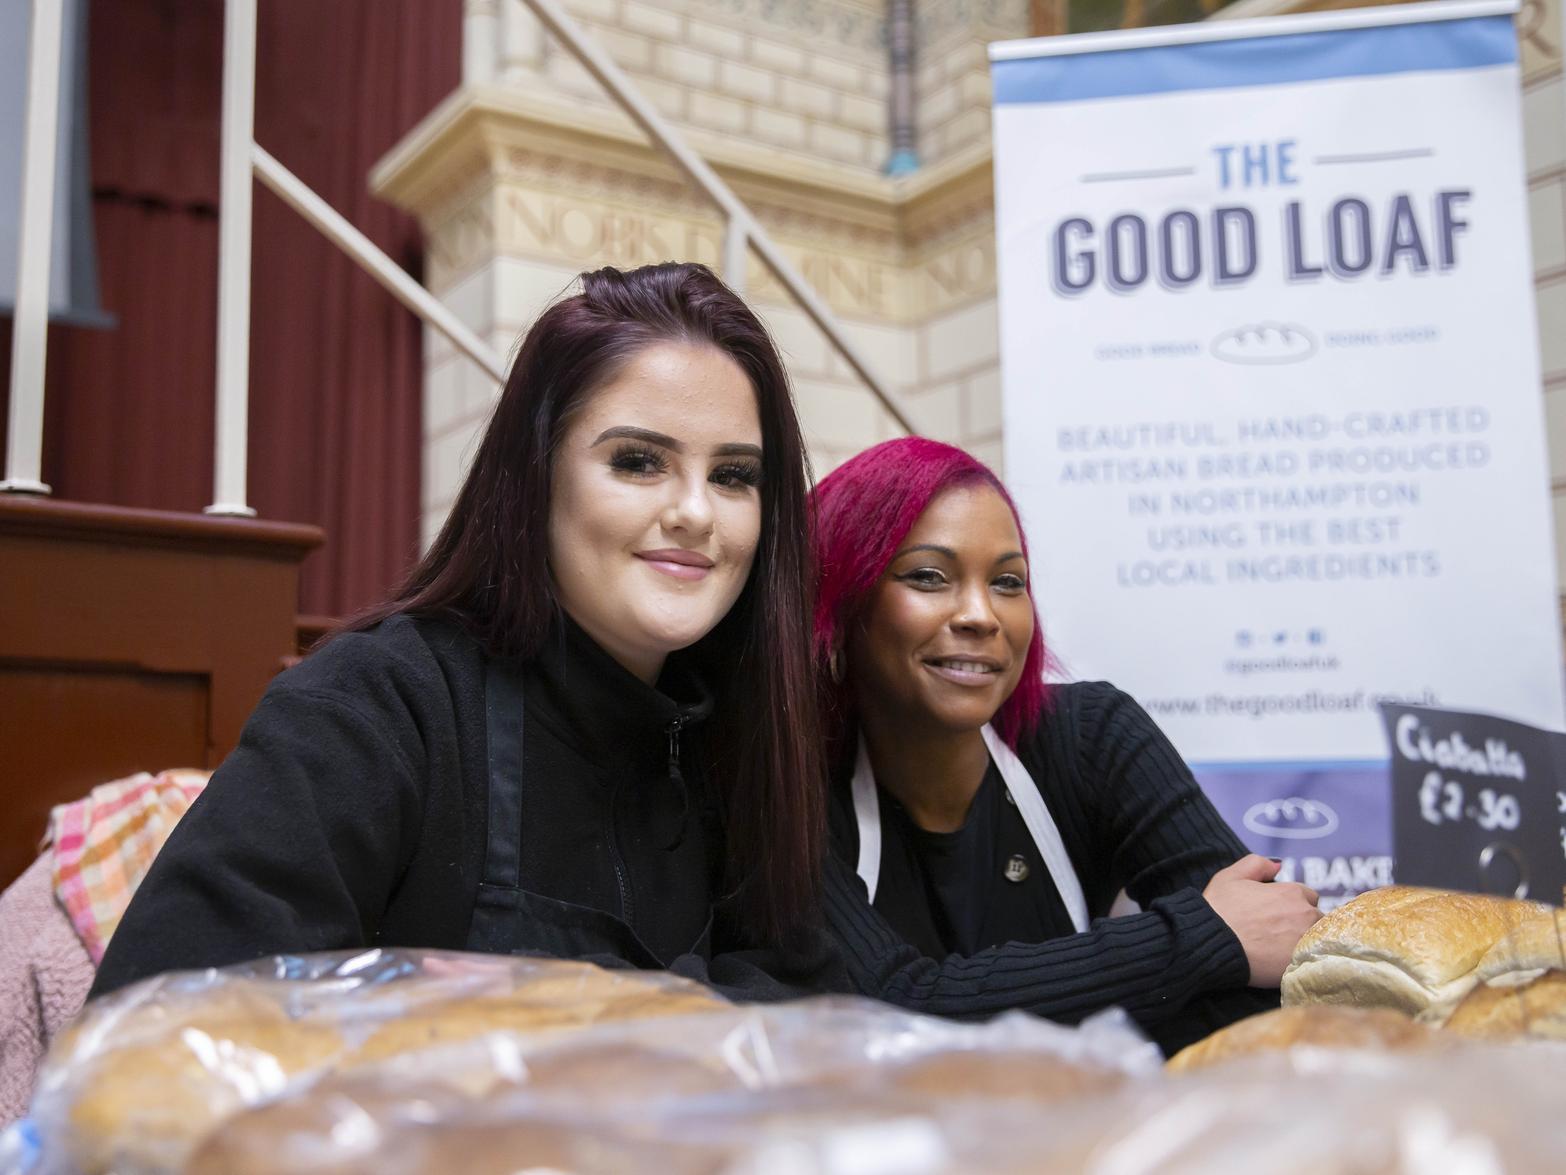 L-R: Jade Van Rooyen and Claire Vernon - The Good Loaf.